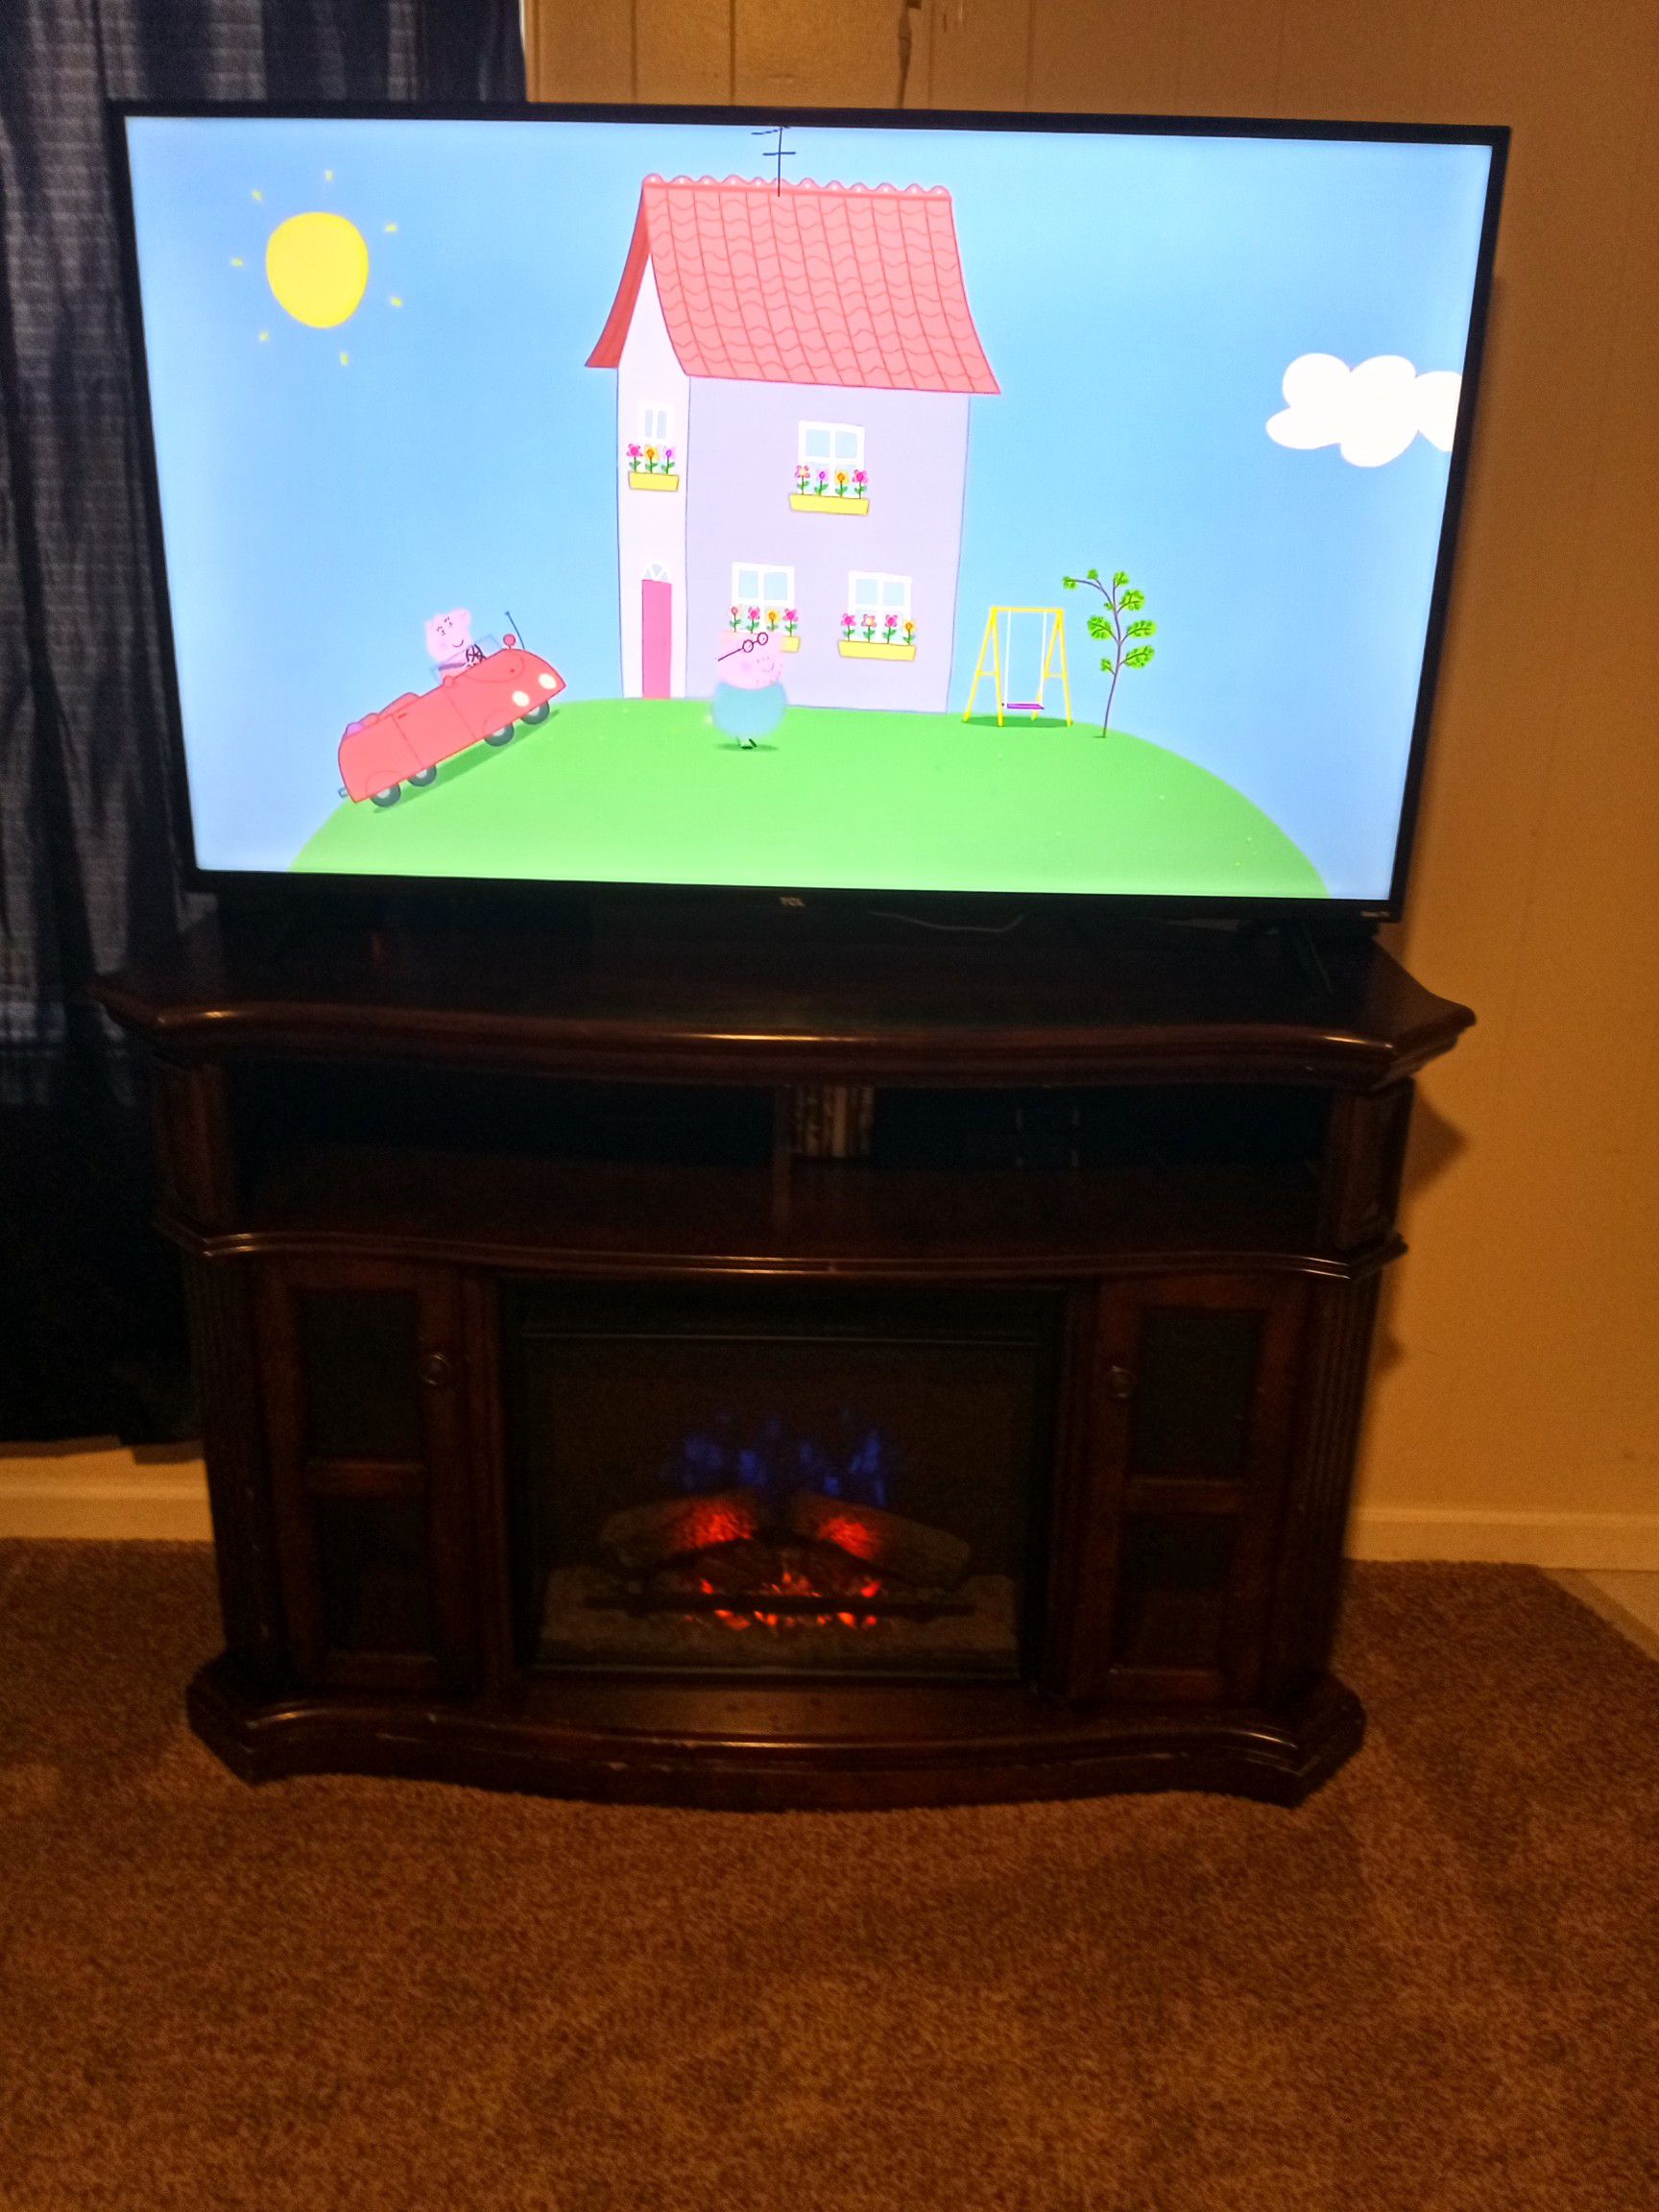 FIREPLACE TV STAND AND 55 INCH TCL SMART FLAT SCREEN TV